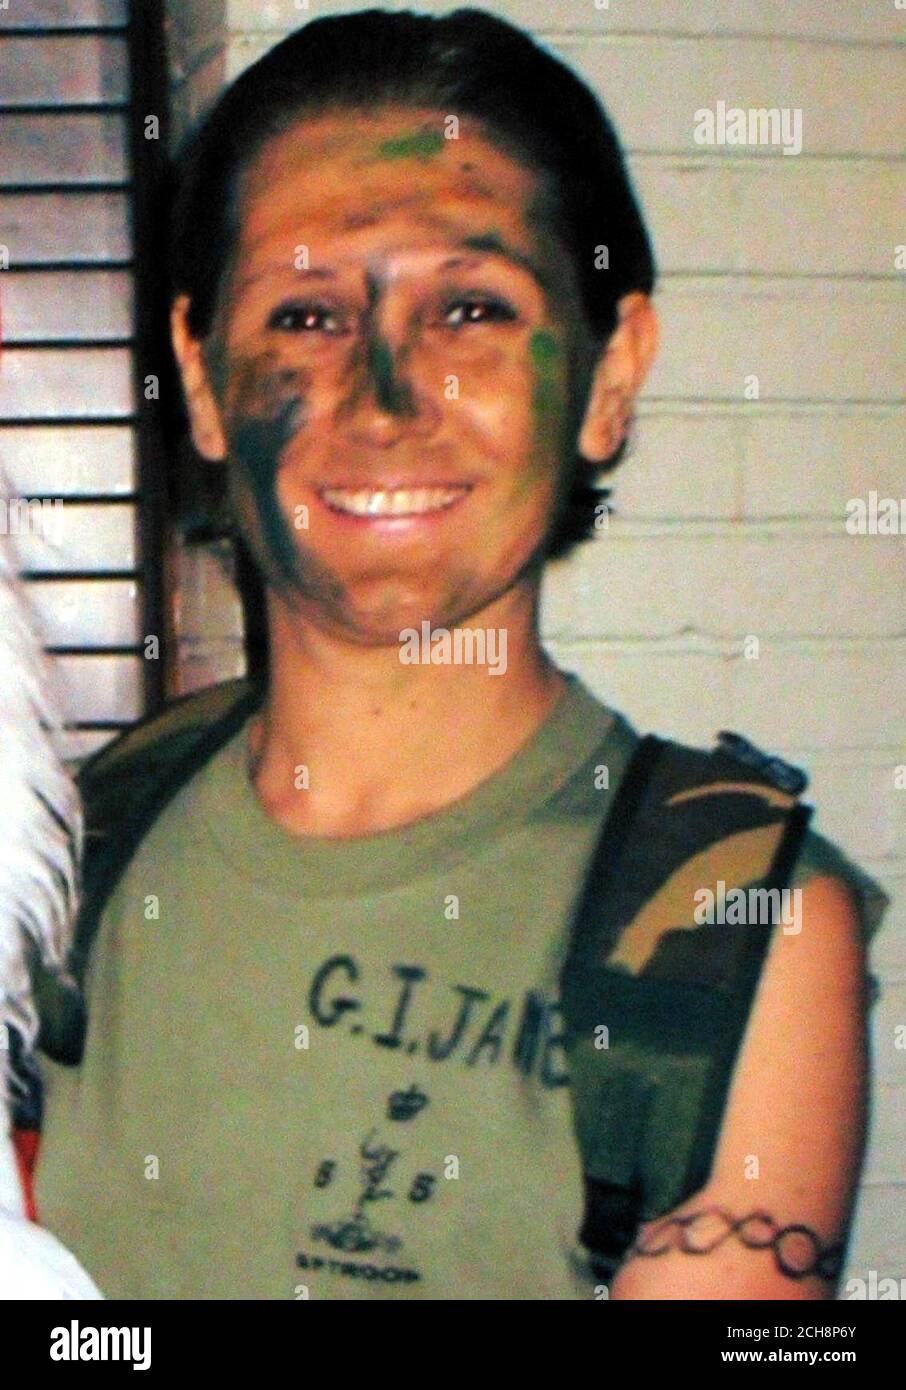 *BEST QUALITY AVAILABLE* Undated collect photo of Denise Halewood, 42, at fancy dress party, dressed as film character GI Jane. The mother-of-three fell to her death from a mountain while on a training expedition with the Territorial Army, it emerged Friday September 9, 2005. Denise Halewood, a sergeant in the 33 Signals Regiment, fell from Mount Rysy, in the Polish Tatra mountains, on July 14. The 42-year-old, from Liverpool, had reached the summit at 2499metres (8198ft) and was on her way down when the accident happened. See PA Story DEATH Army. PRESS ASSOCIATION Photo. Photo credit should Stock Photo